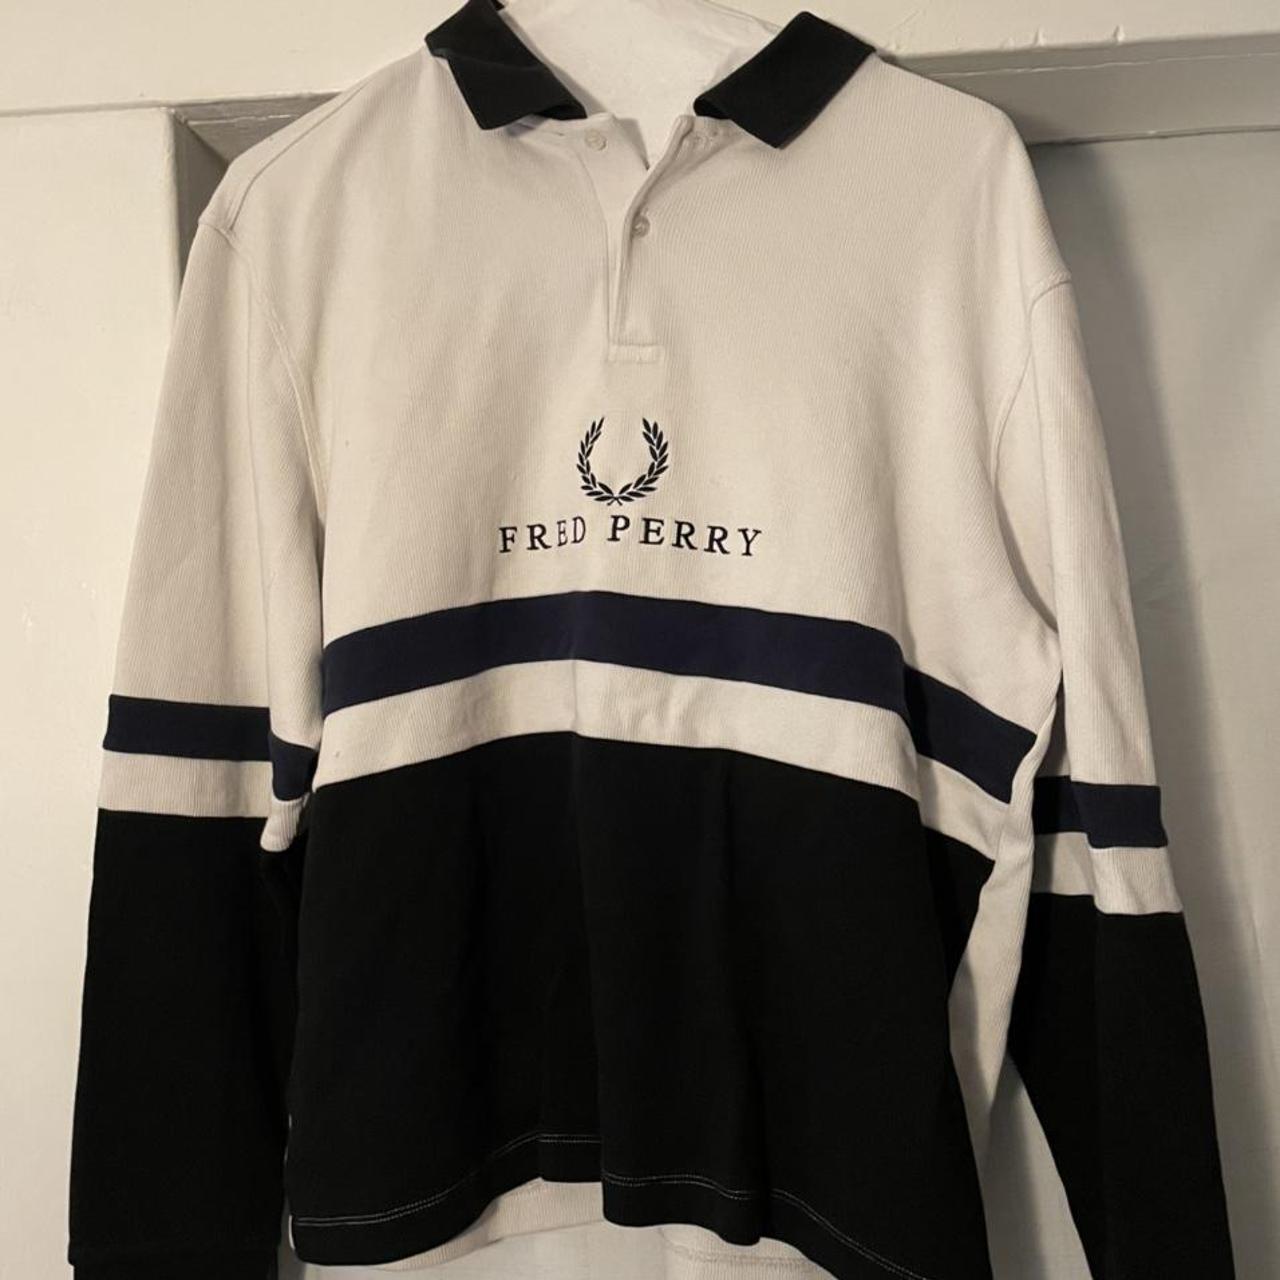 Fred Perry Rugby Longsleeve Shirt Good condition,... - Depop